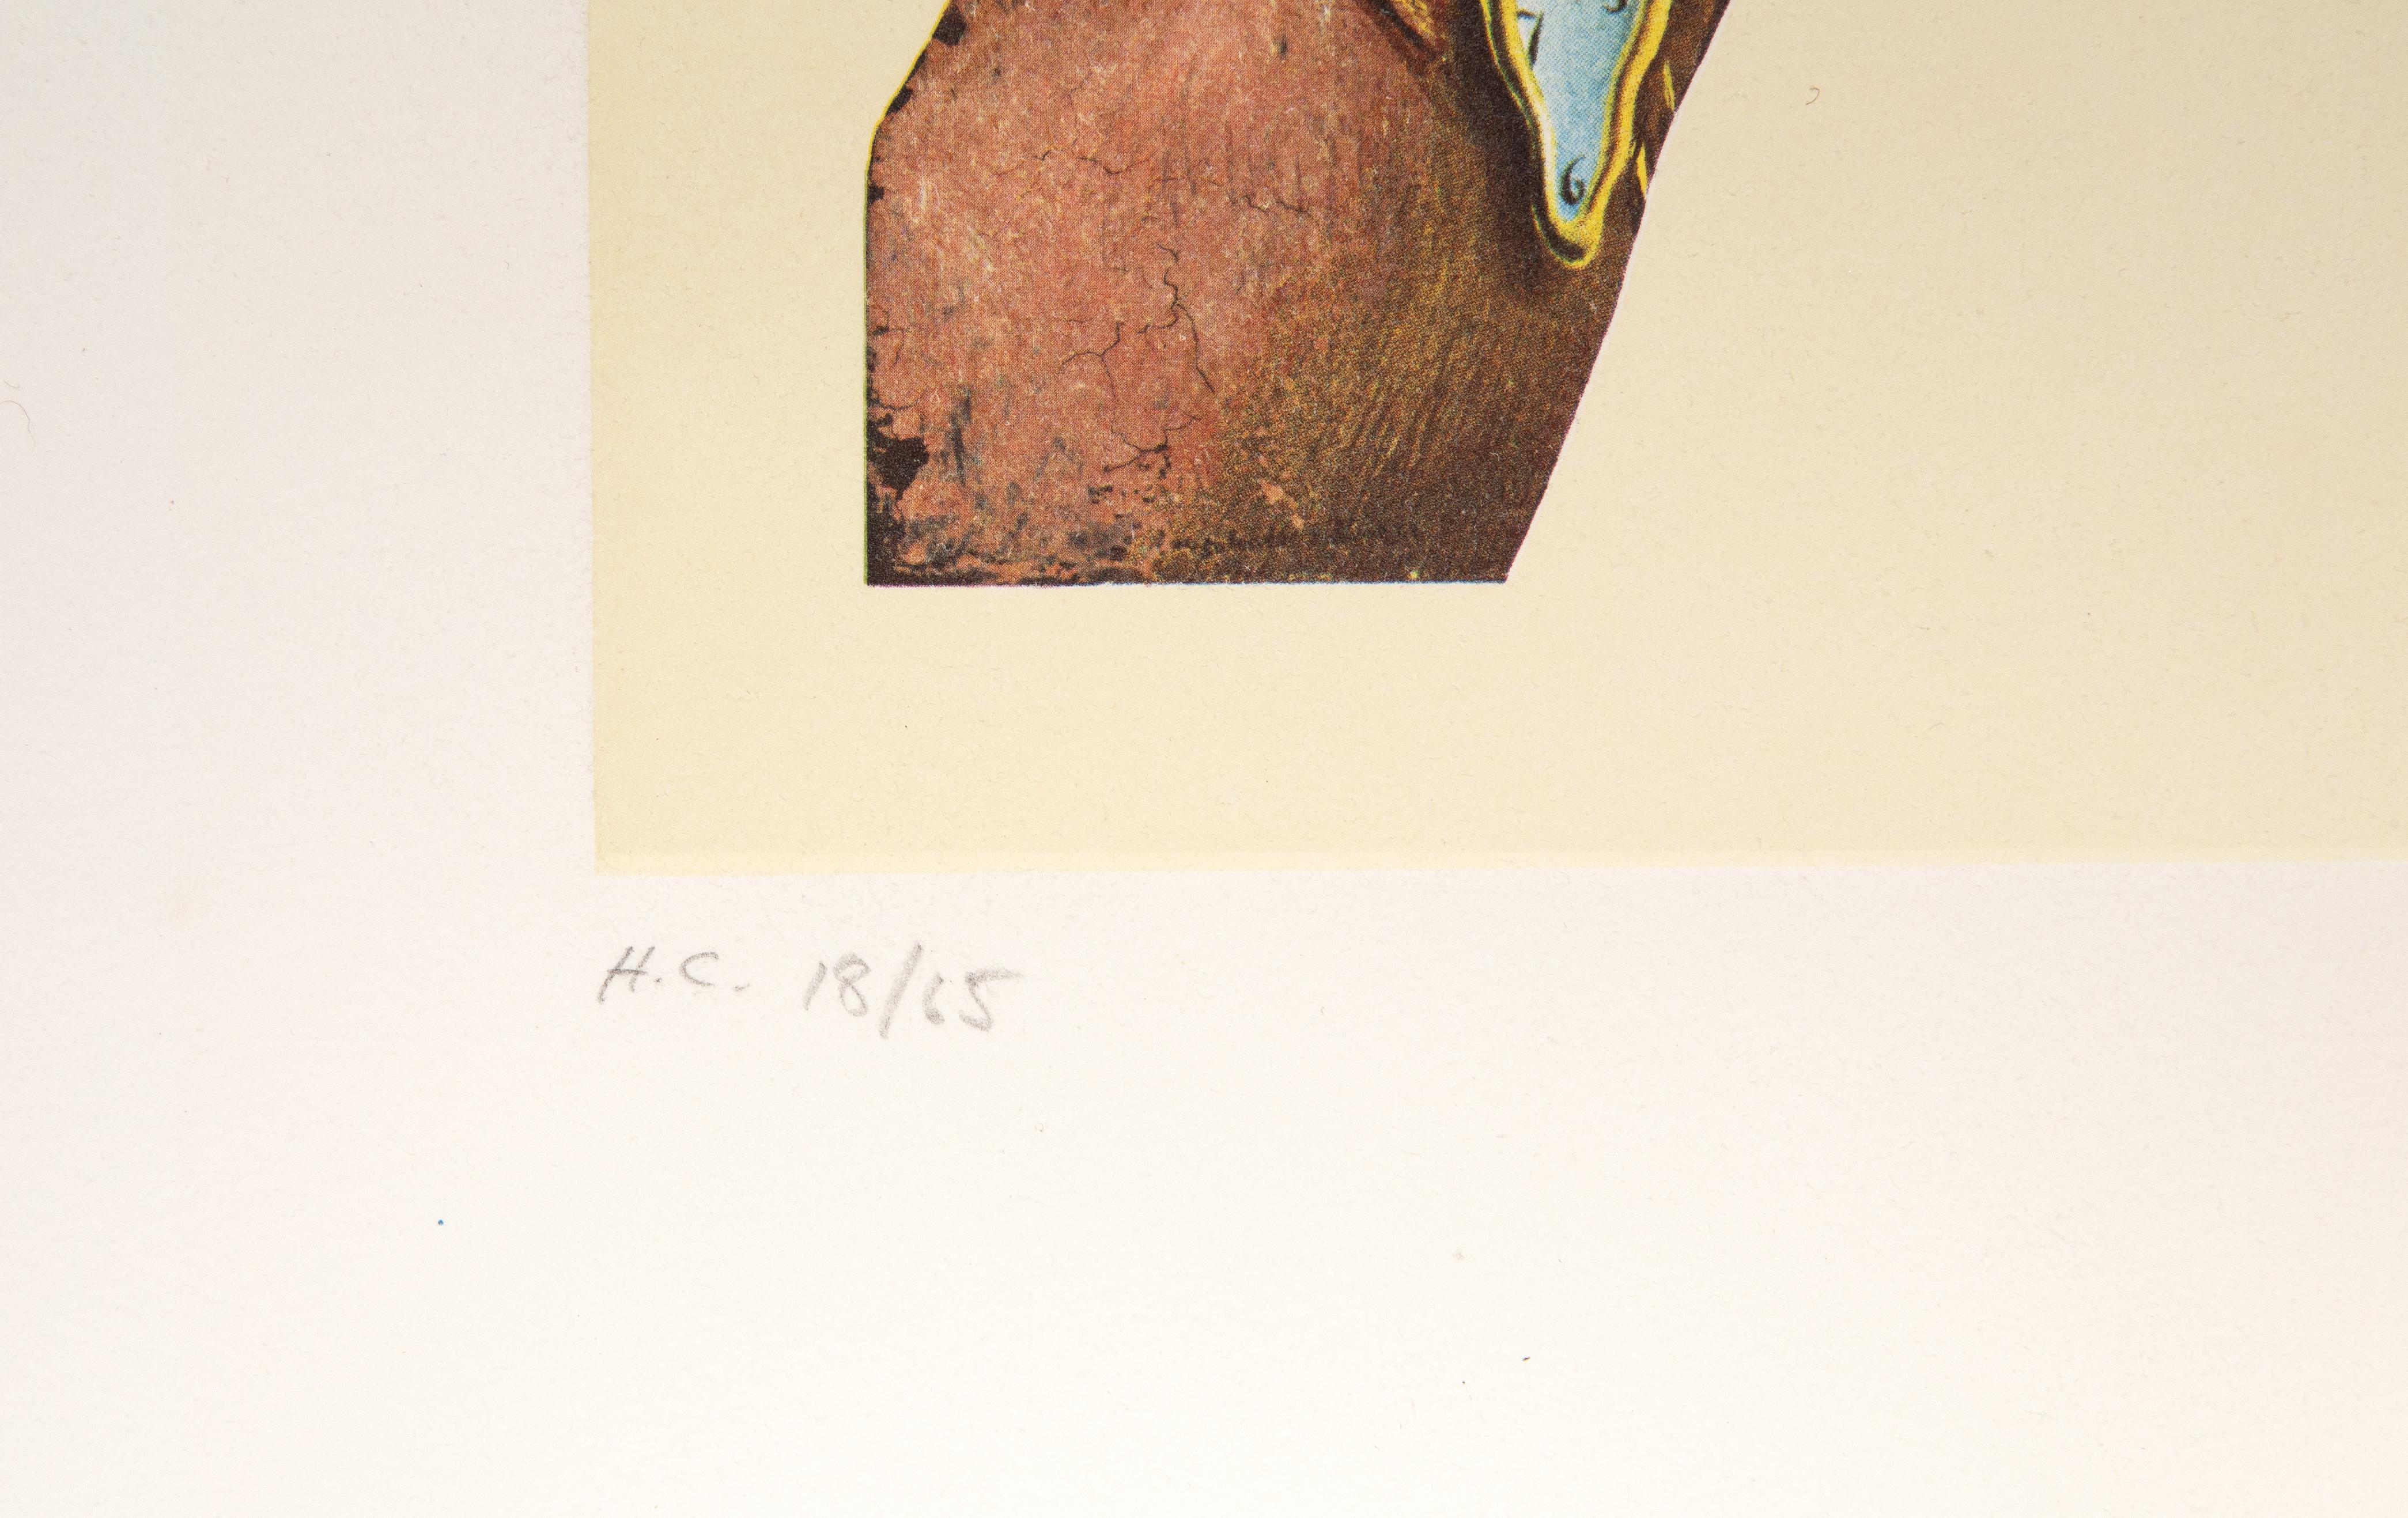 A lithograph and etching on Arches paper after Salvador Dali The Cycles of Life portfolio, made in 1977. This was printed by Forte and published by Duall Graphics for DALART. It is referenced in Field as 79-1-C.

Reflection
Salvador Dali, Spanish